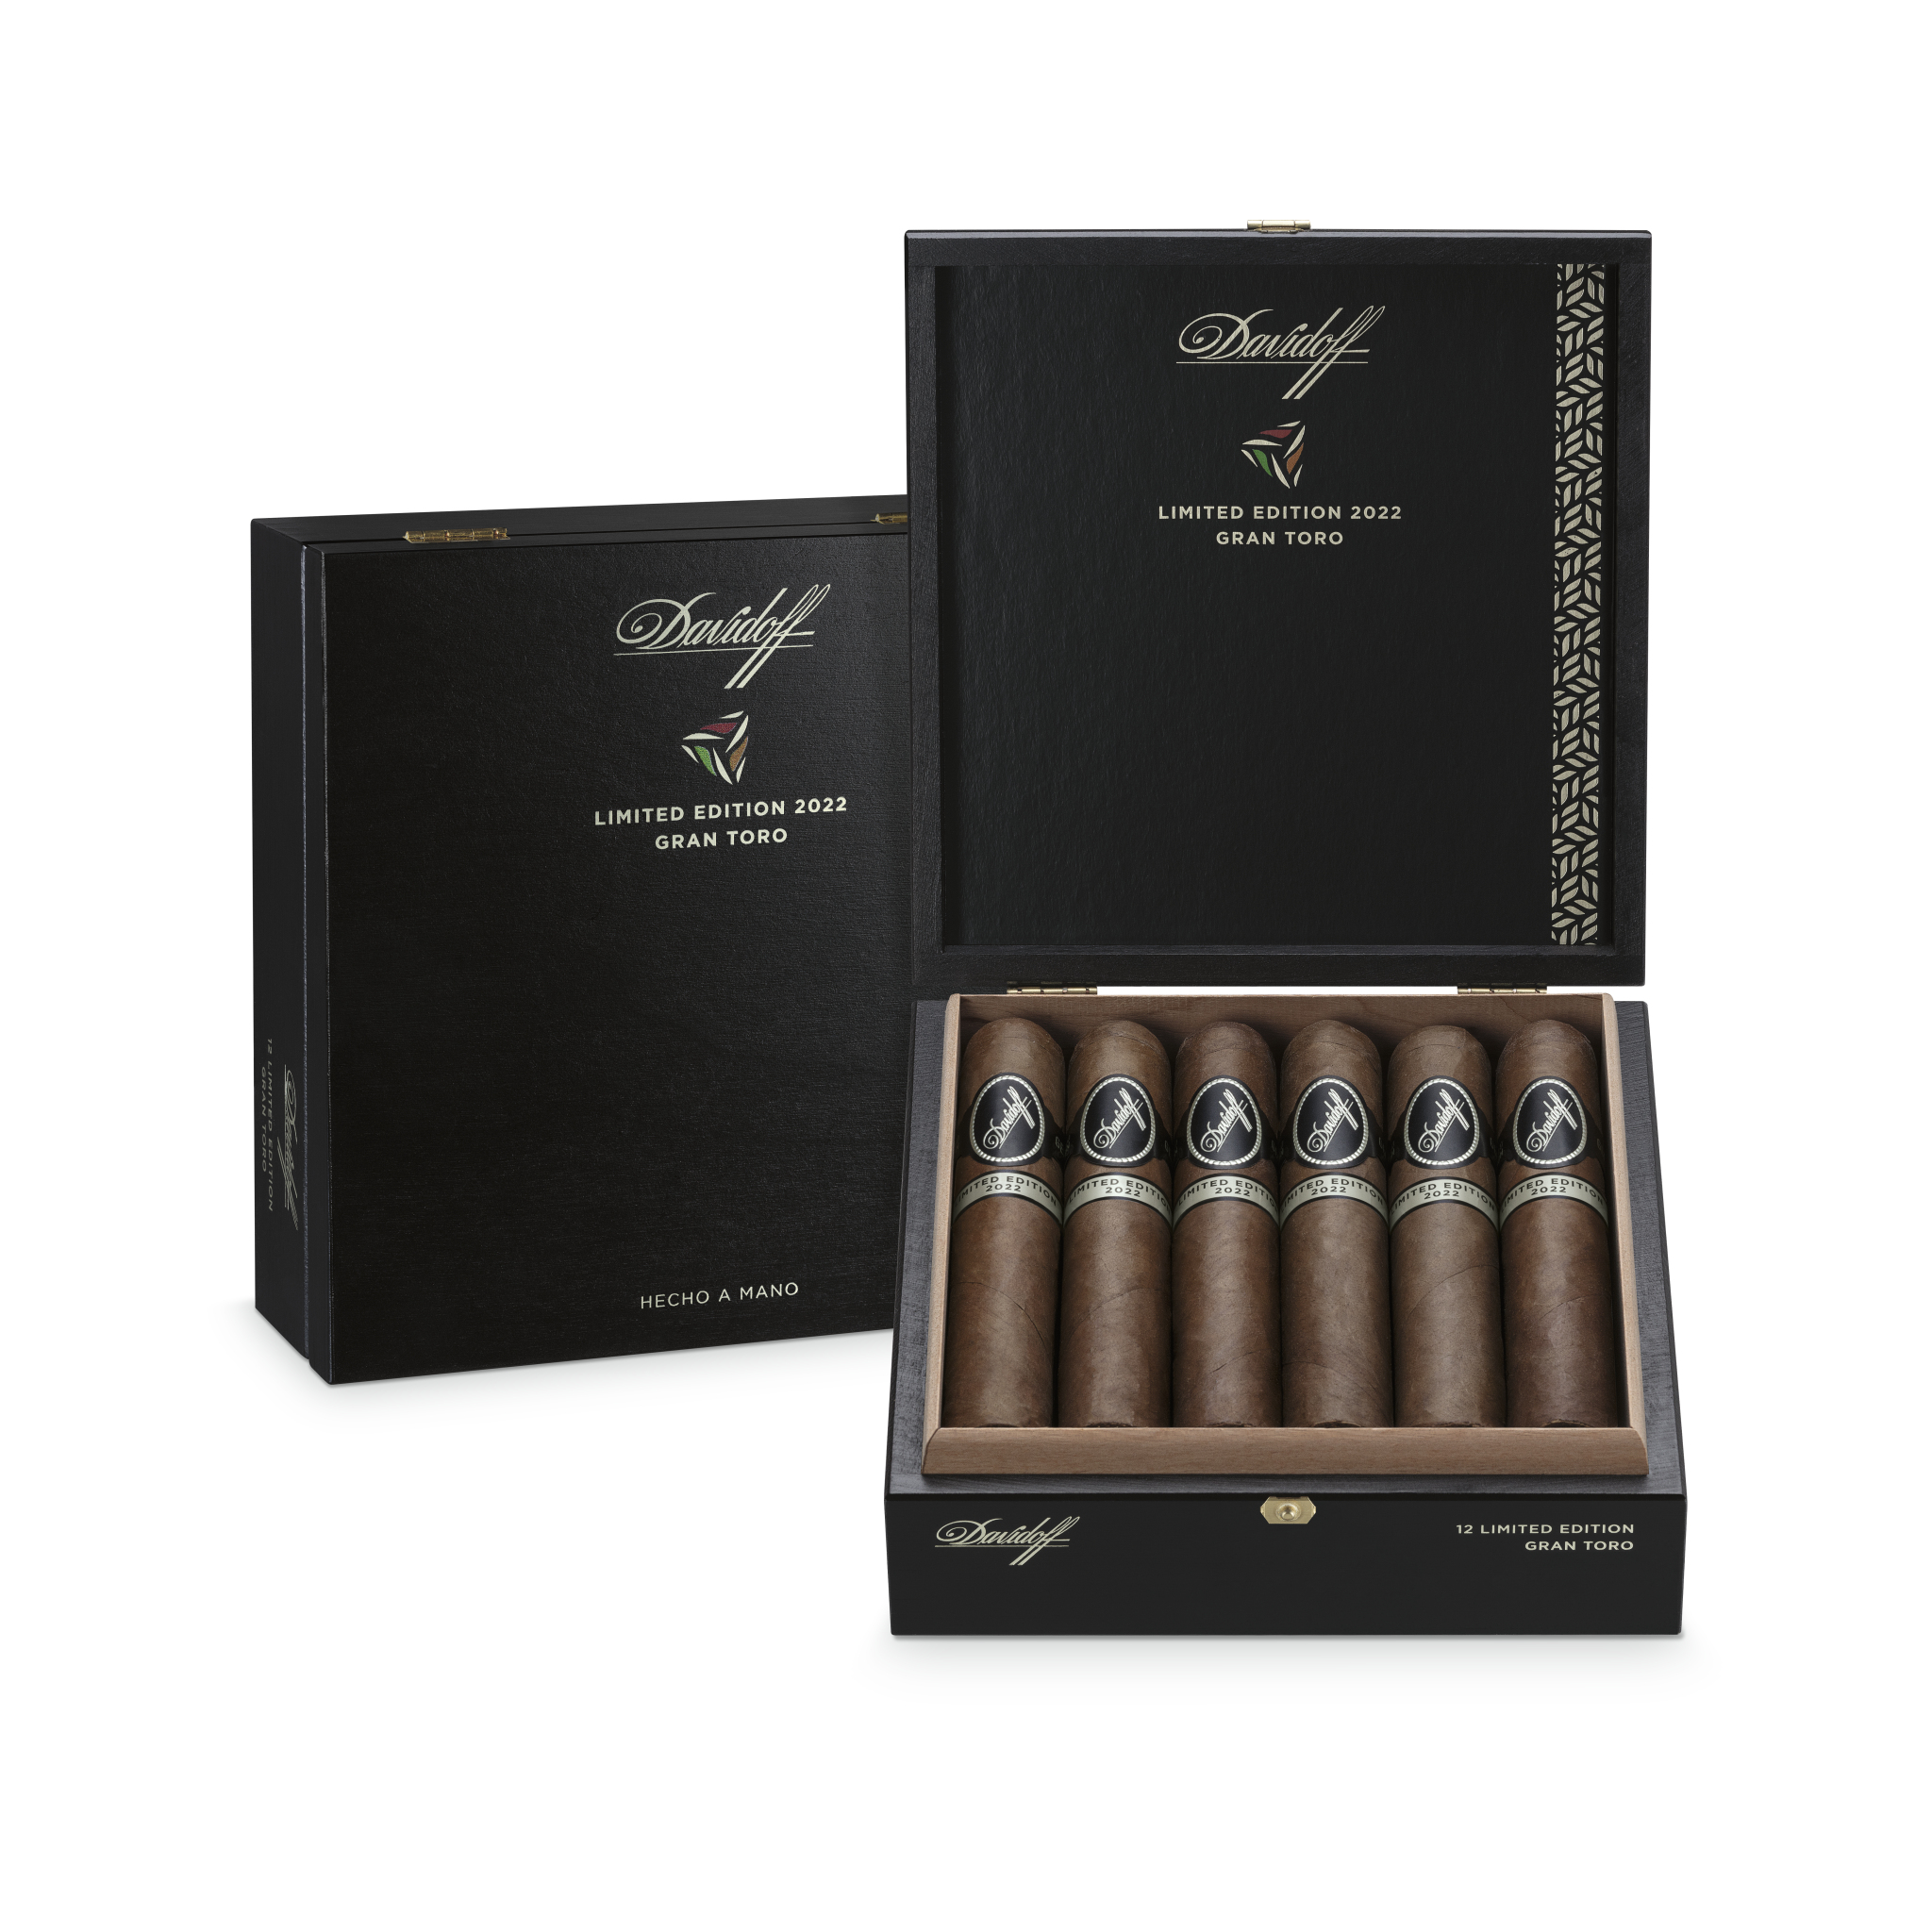 The Davidoff Black Label Limited Edition 2022 Has Arrived